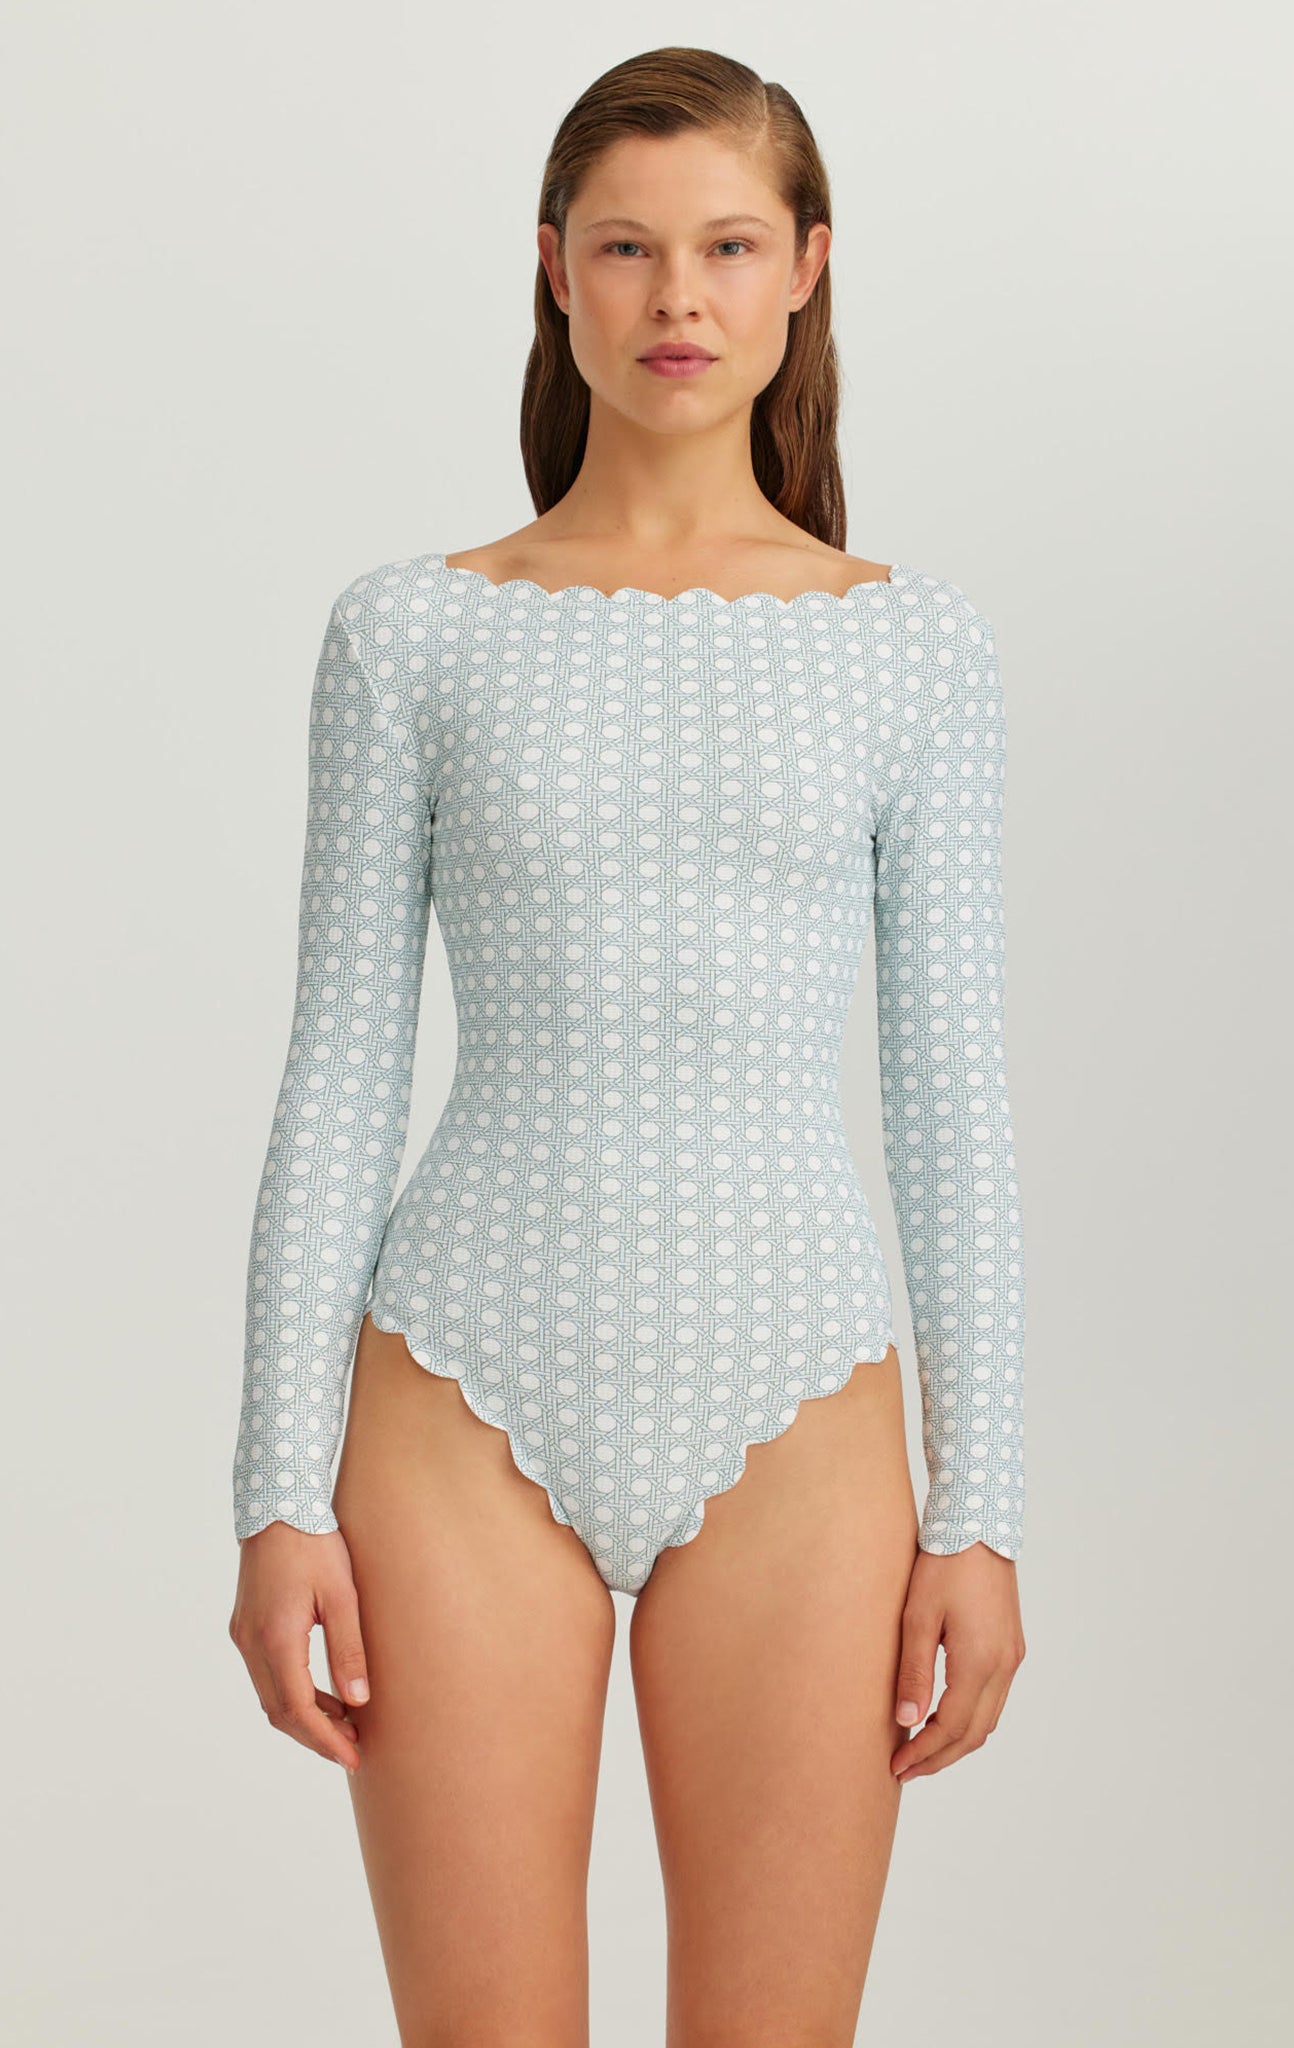 Holly Point Onesie in Morning Cane Print